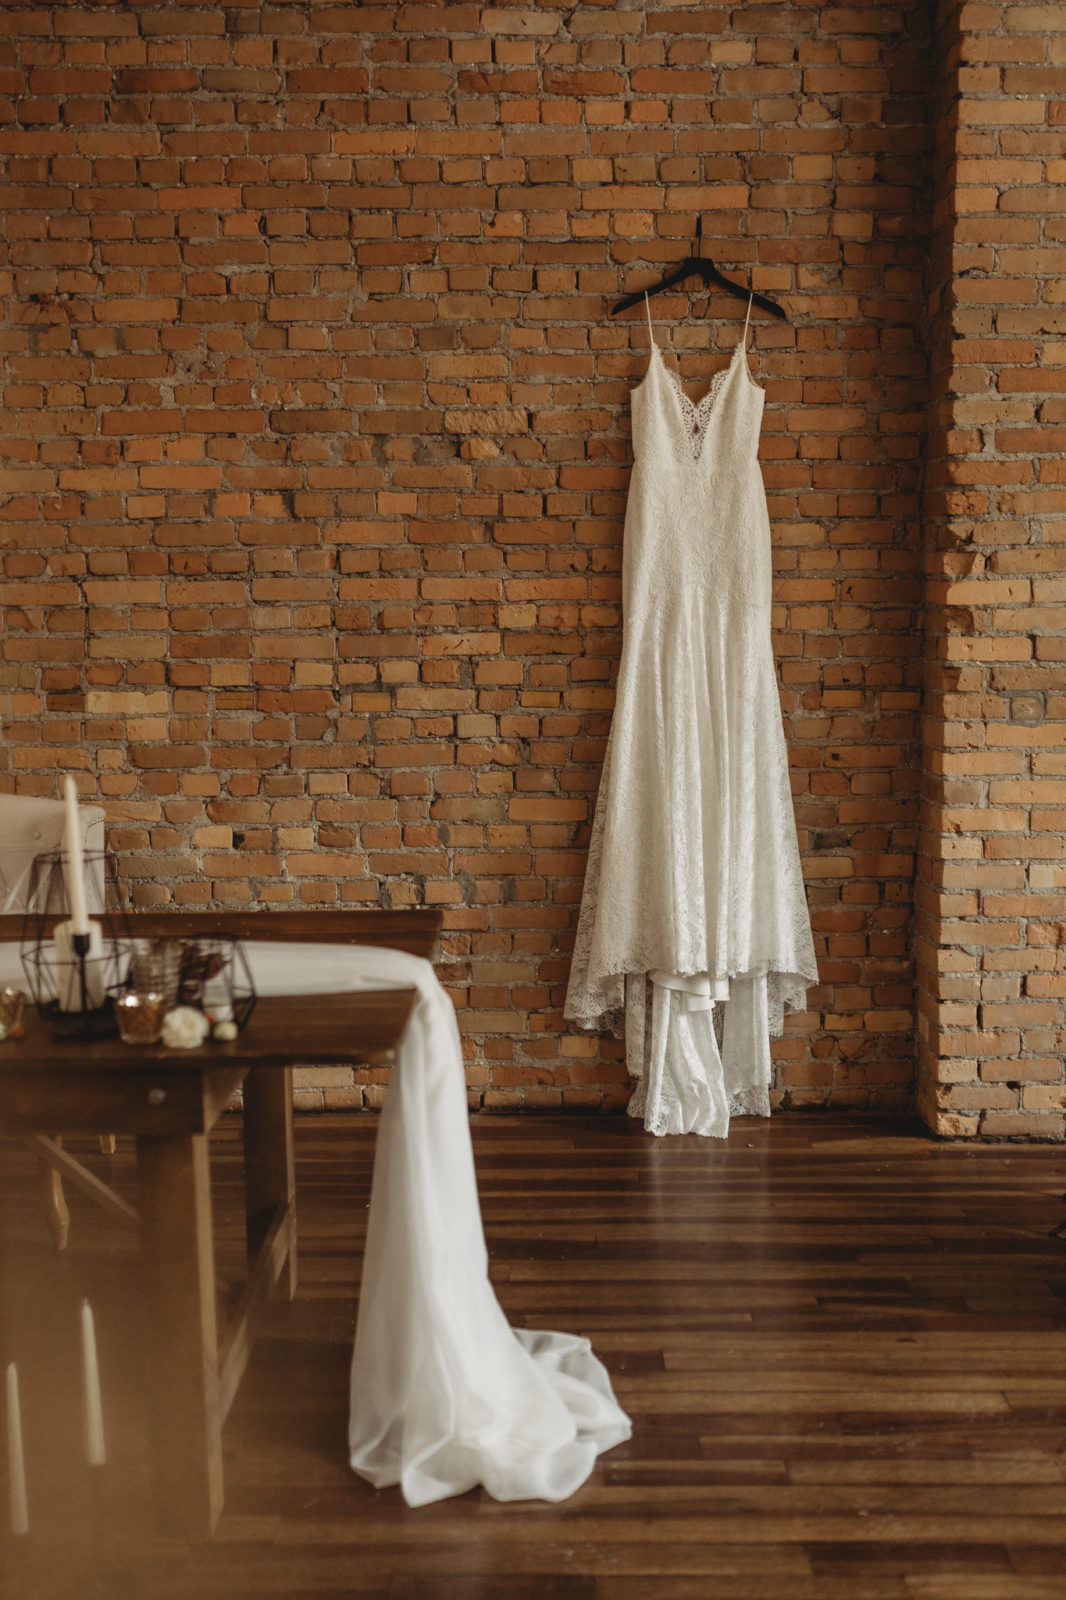 Anais Anette Flagship lace gown hanging on display against a brick wall at The Garret